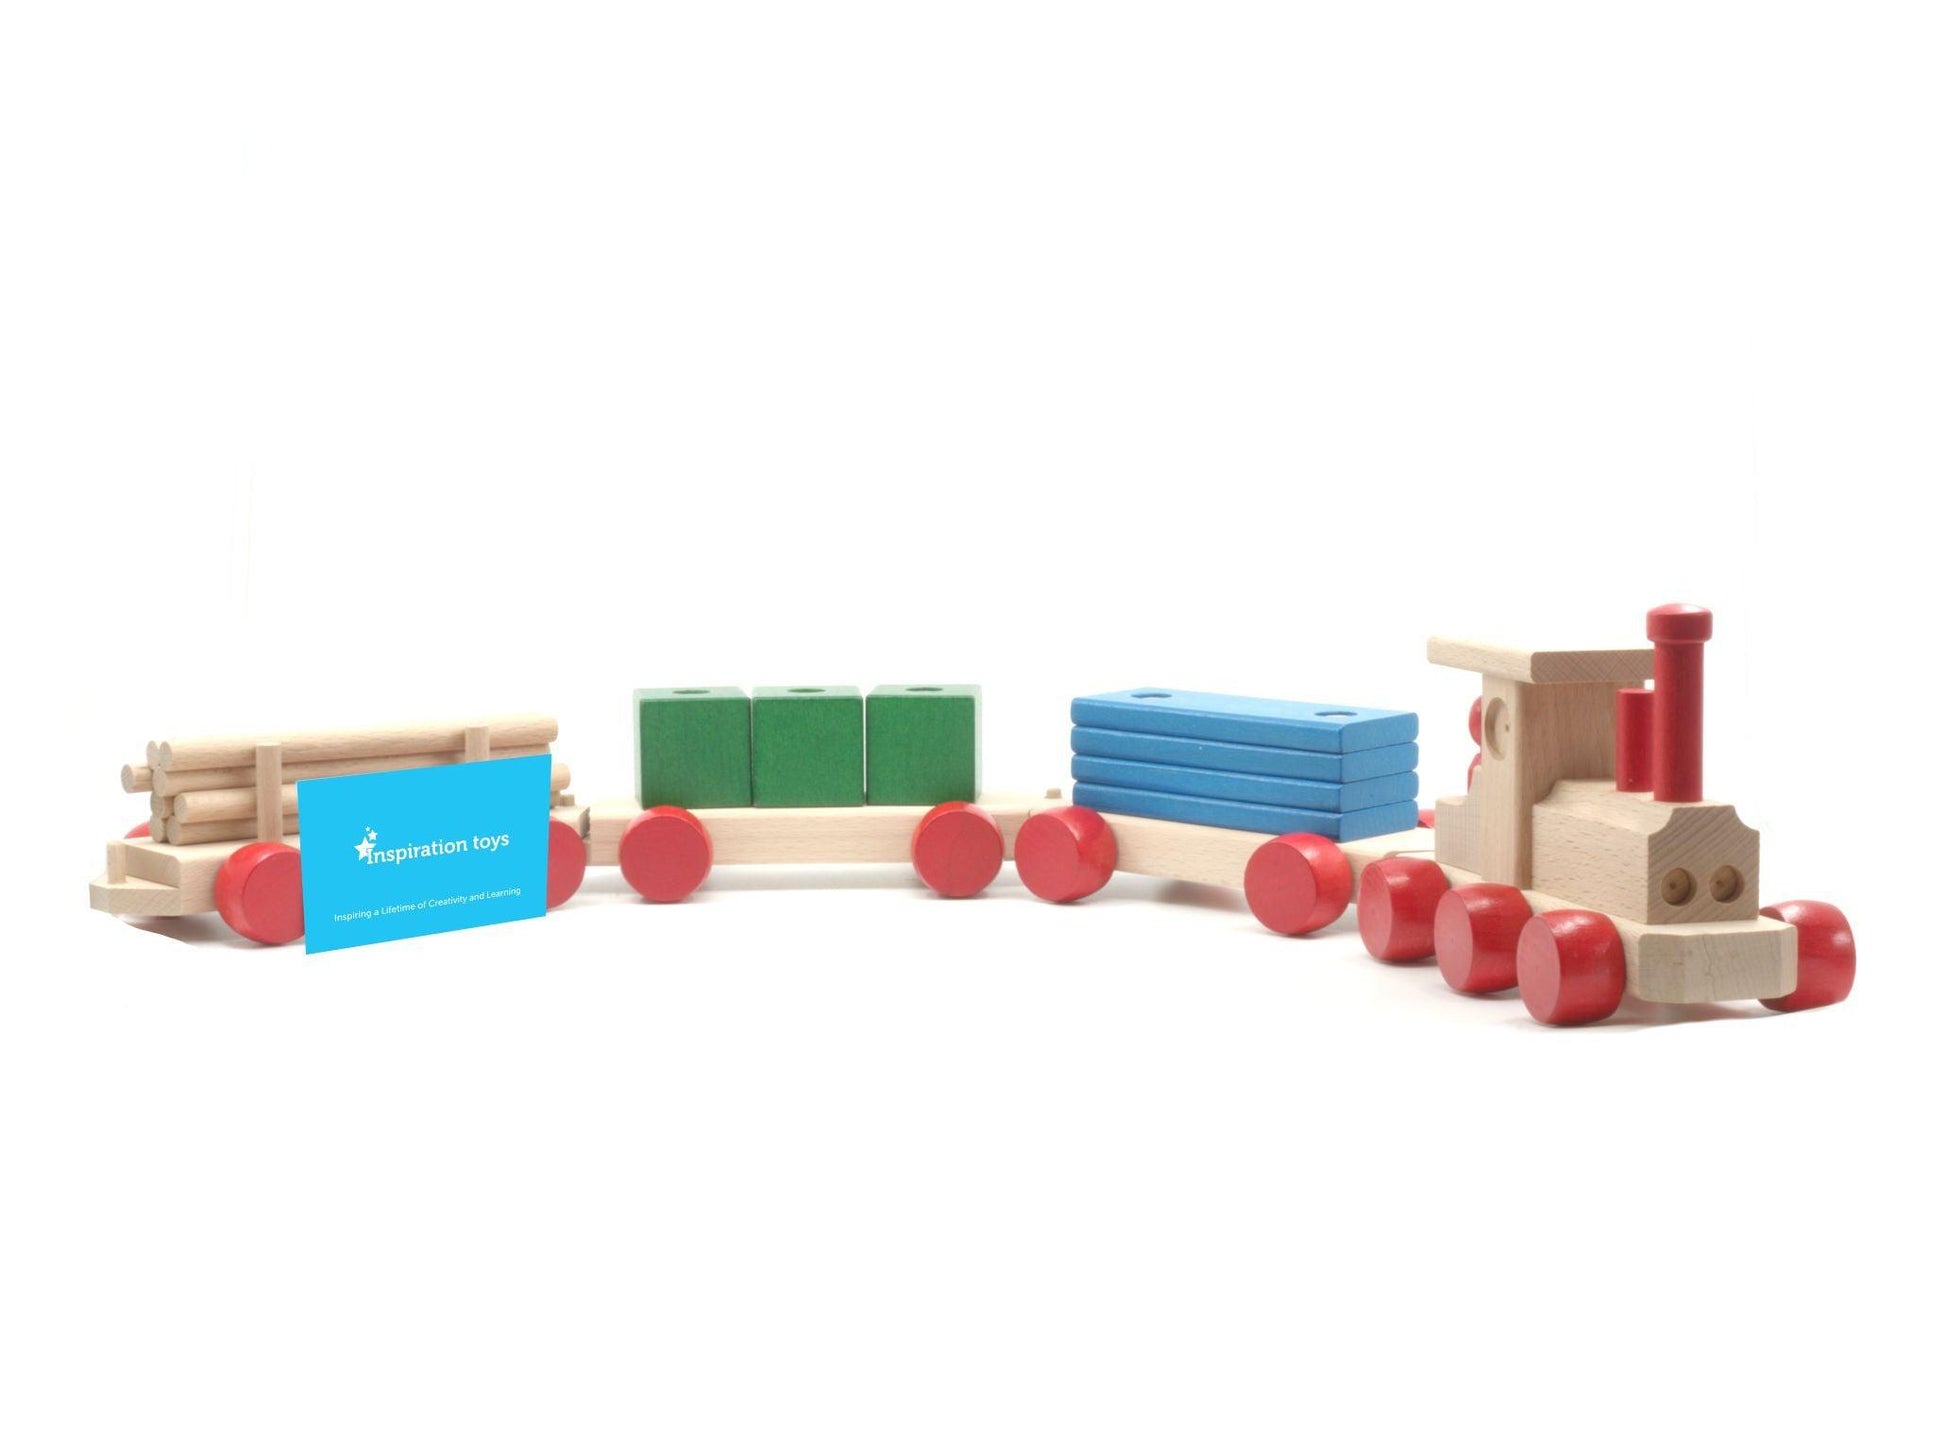 Large Wooden Toy Train Assembled Side View